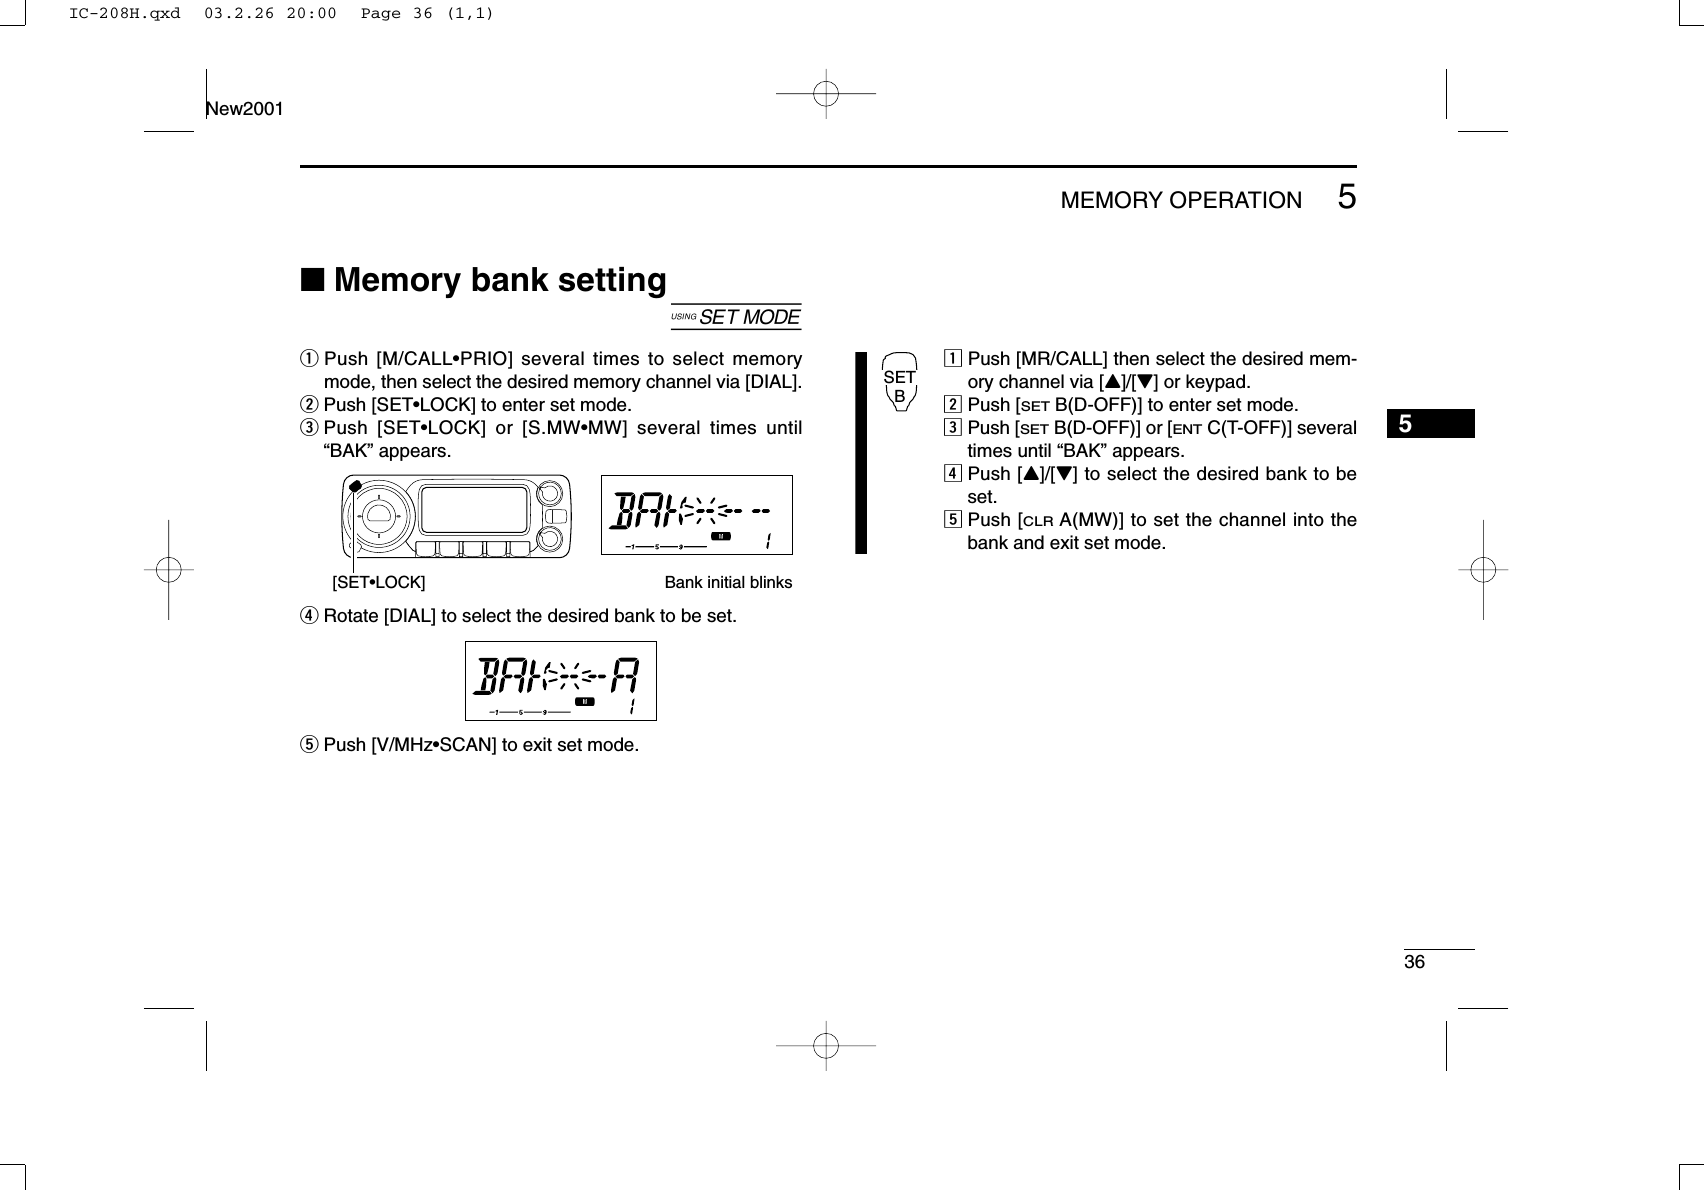 365MEMORY OPERATIONNew20015■Memory bank setting[qPush [M/CALL•PRIO] several times to select memorymode, then select the desired memory channel via [DIAL].wPush [SET•LOCK] to enter set mode.ePush [SET•LOCK] or [S.MW•MW] several times until“BAK” appears.rRotate [DIAL] to select the desired bank to be set.tPush [V/MHz•SCAN] to exit set mode.zPush [MR/CALL] then select the desired mem-ory channel via [Y]/[Z] or keypad.xPush [SETB(D-OFF)] to enter set mode.cPush [SETB(D-OFF)] or [ENTC(T-OFF)] severaltimes until “BAK” appears.vPush [Y]/[Z] to select the desired bank to beset.bPush [CLRA(MW)] to set the channel into thebank and exit set mode.SETB[SET•LOCK] Bank initial blinksIC-208H.qxd  03.2.26 20:00  Page 36 (1,1)